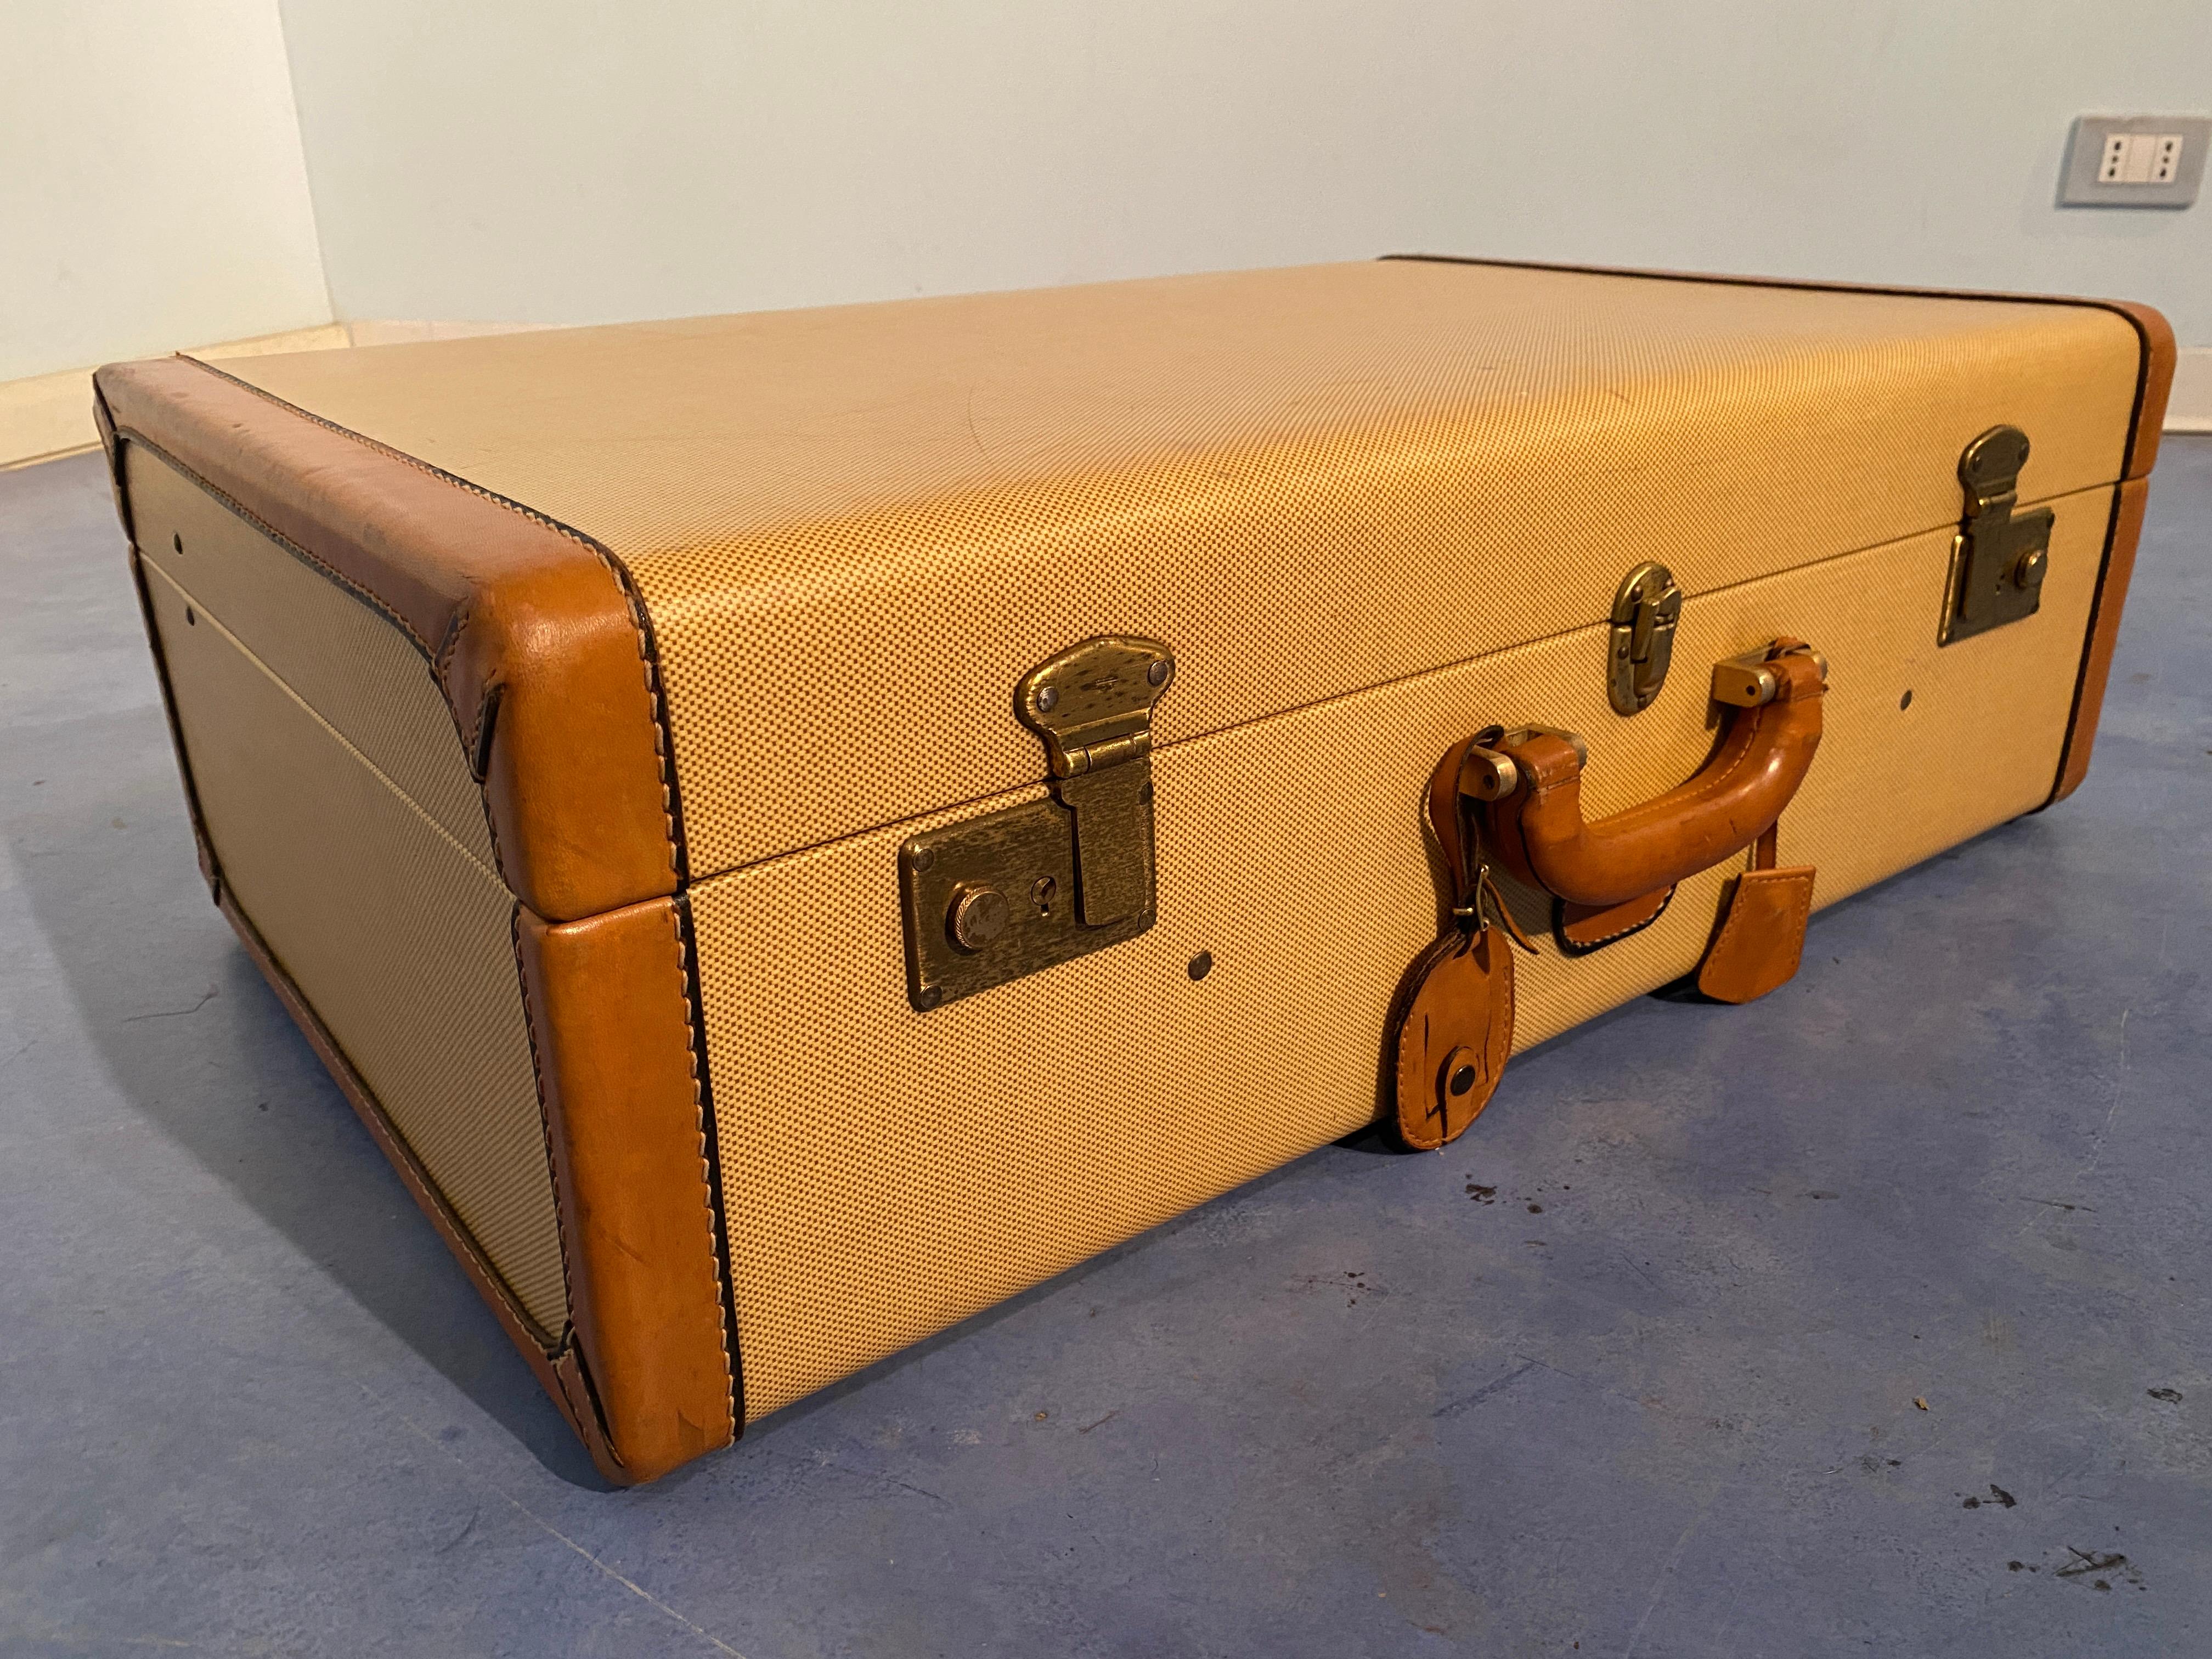 Beautiful Italian suitcase dating back to 1960. Very special as a collector's item or as a piece of furniture. The suitcase is in very good condition, and it is fully original. It can still be used today. Original working locks and original keys are